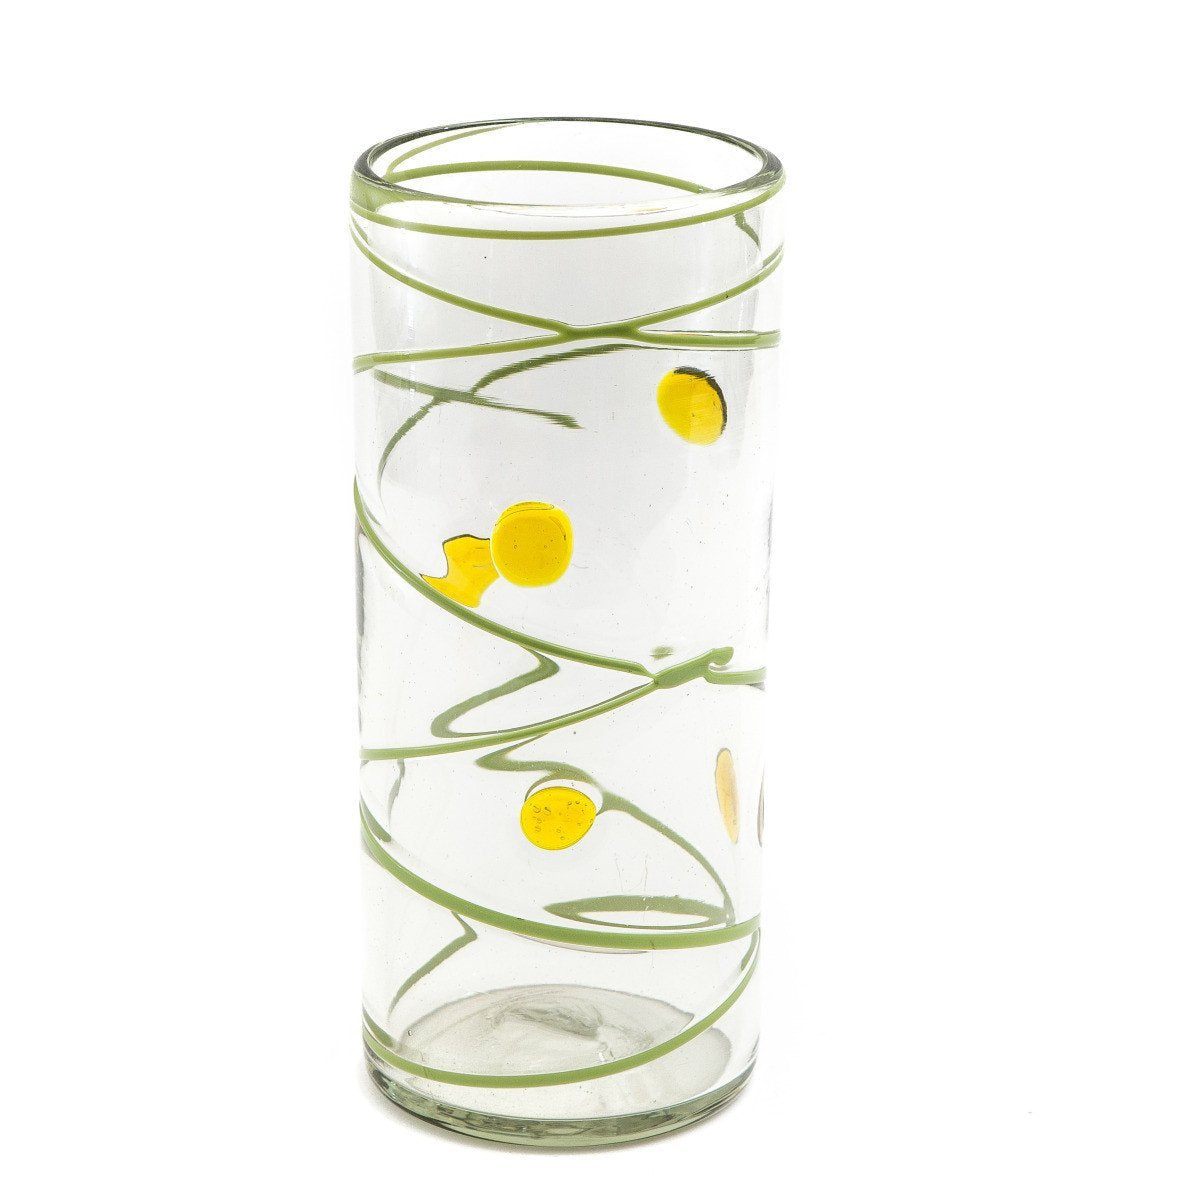 Nuvo Cylinder Vase - Circus Lime - Worldly Goods Too